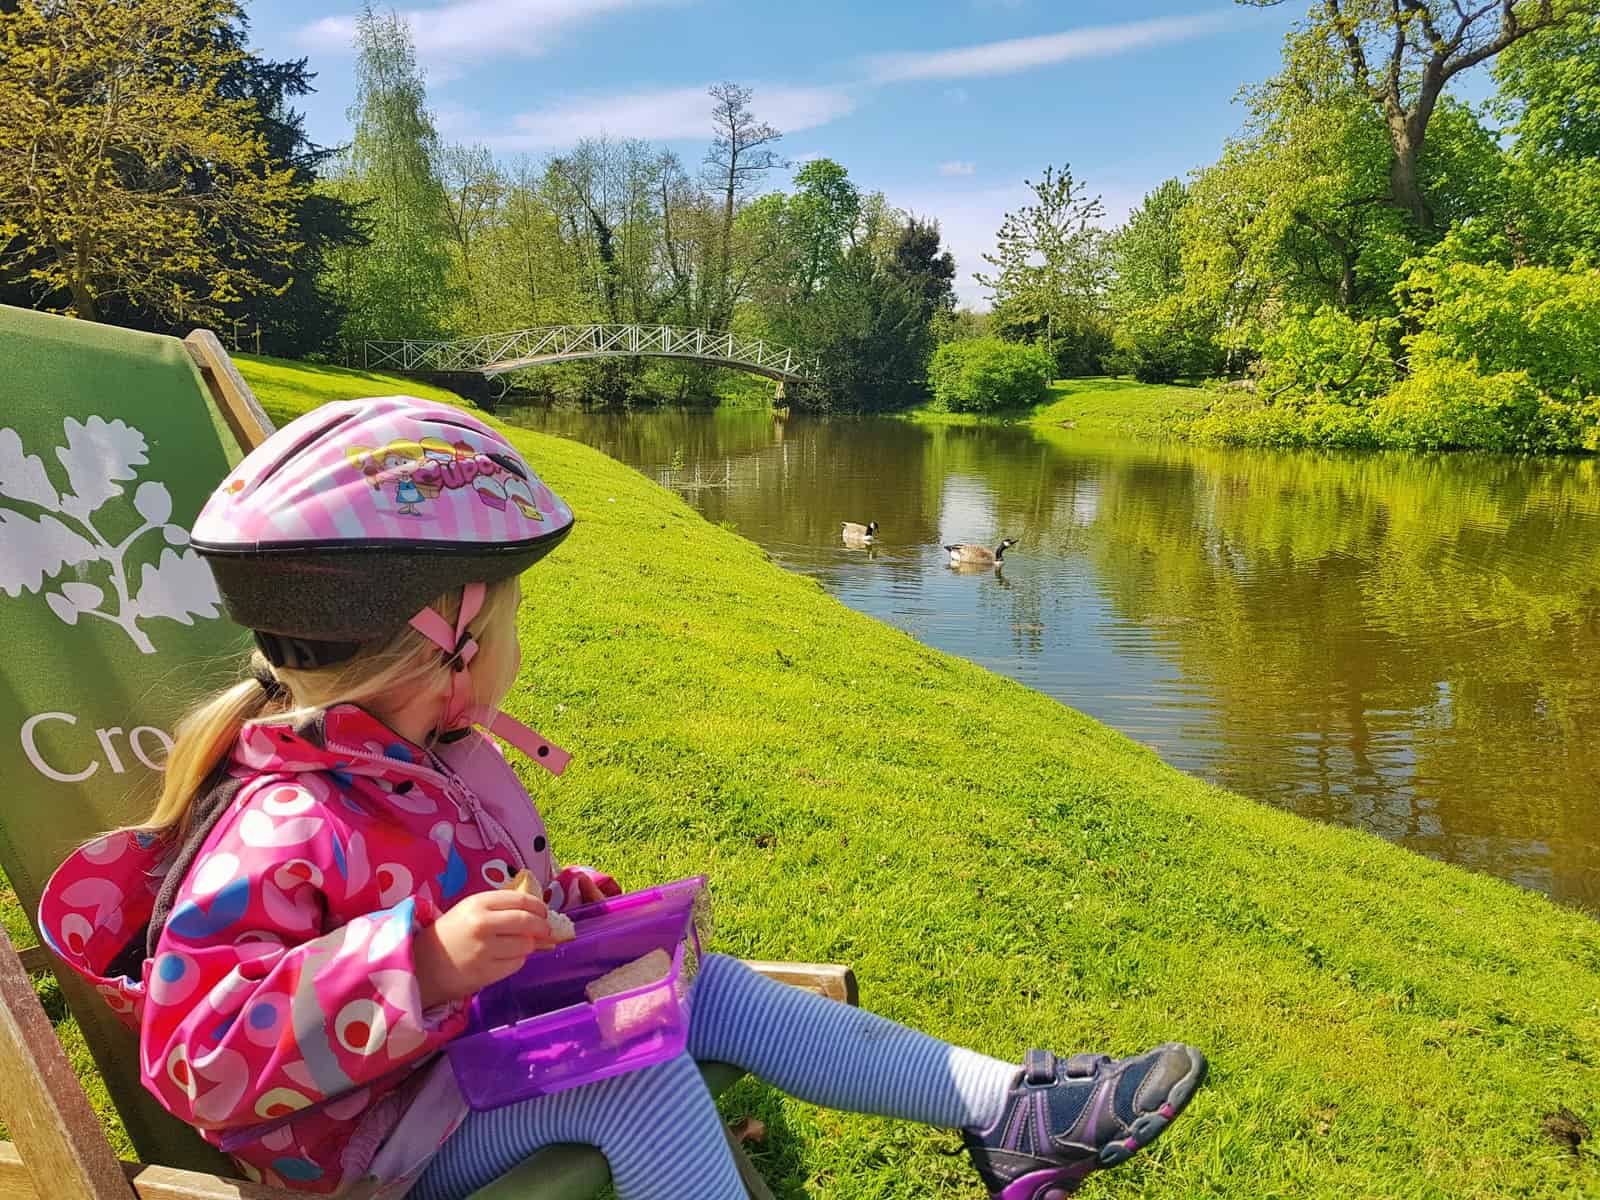 Little girl wearing a cycling helmet and eating from a lunchbox, staring into the distance at a river with bridge over